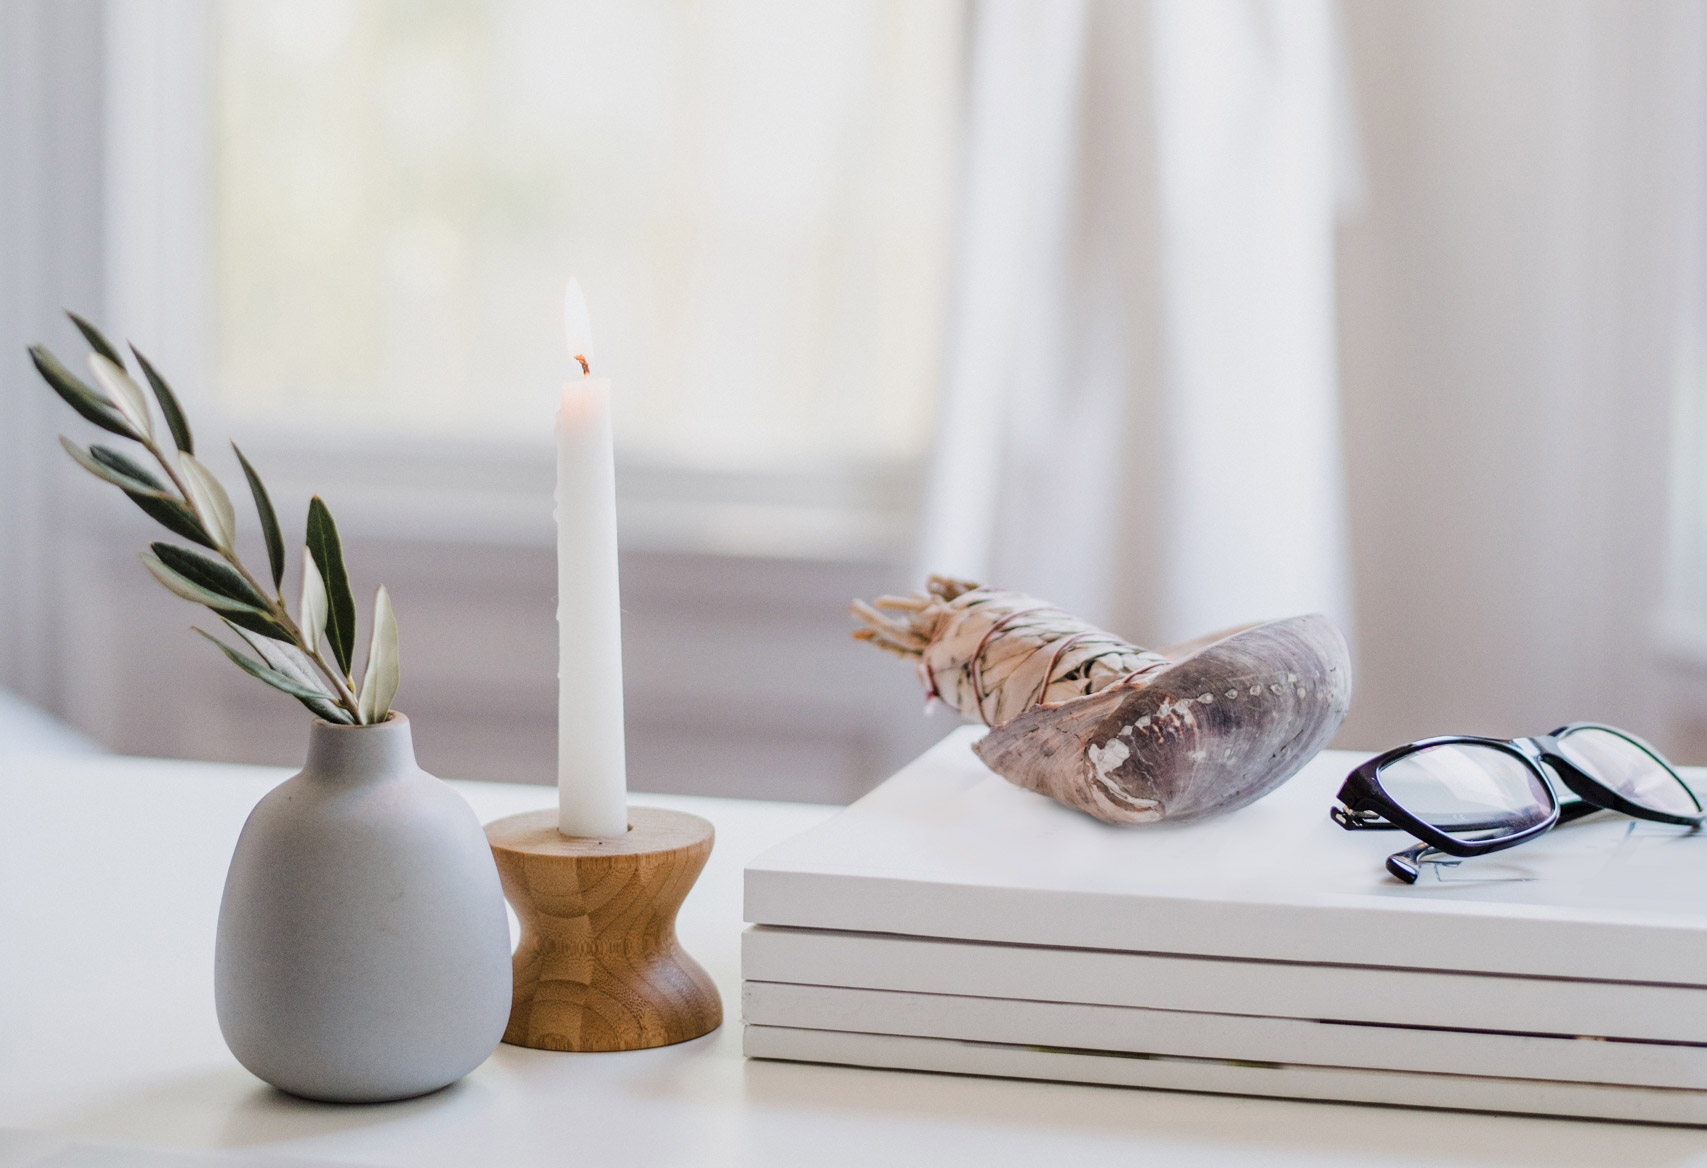 A bud vase with a branch, a lit candle, and a pair of glasses sitting on a table, projecting the kind of serenity many leaders hope to find through coaching.